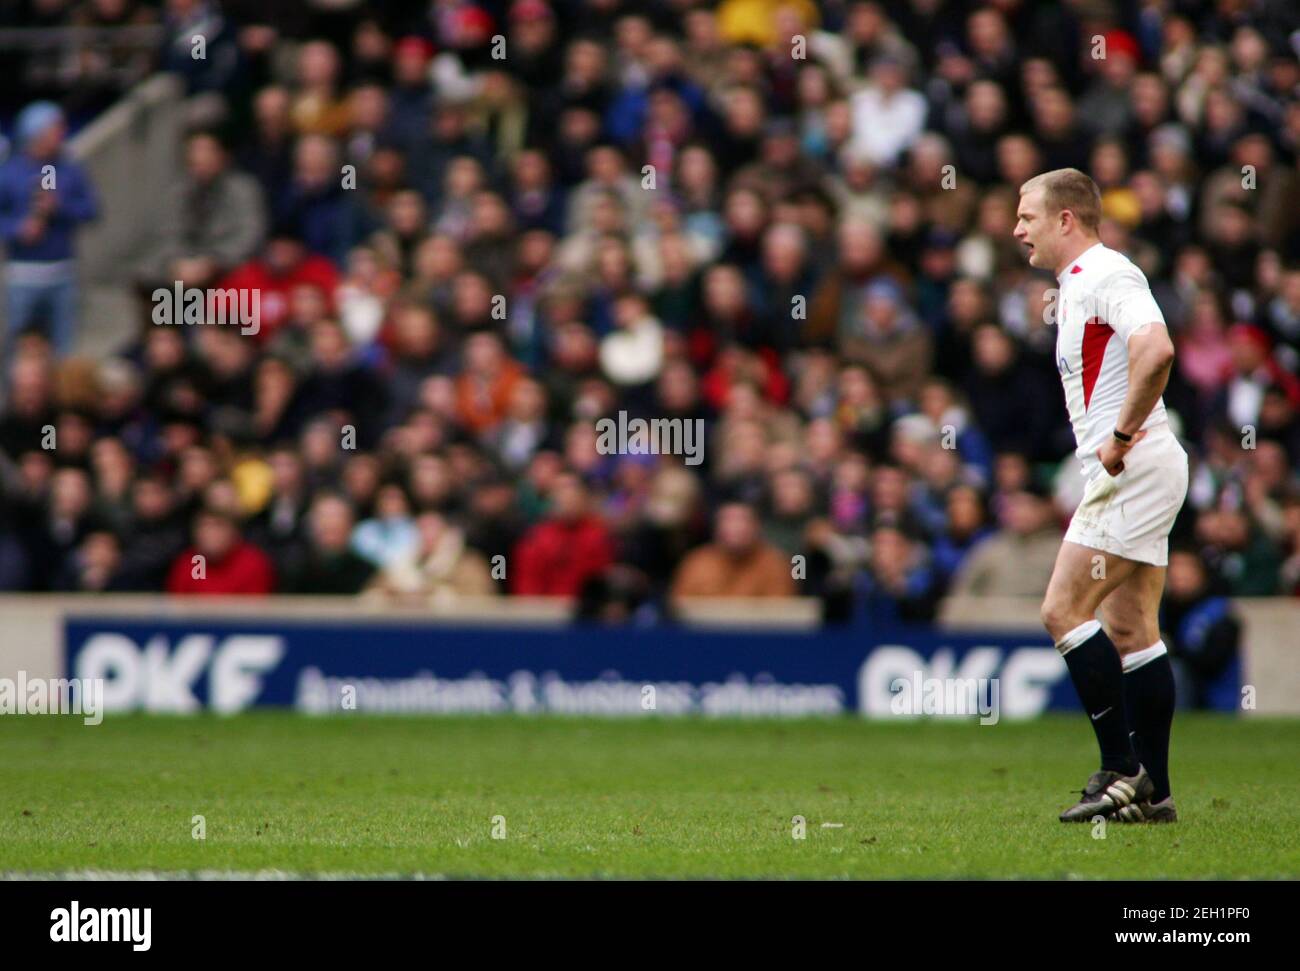 Rugby Union - Angleterre / France RBS six Nations Championship 2005 - Twickenham, Londres - 13/2/05 PKF ad-board crédit obligatoire: Action Images / Andrew Couldridge Livepic Banque D'Images